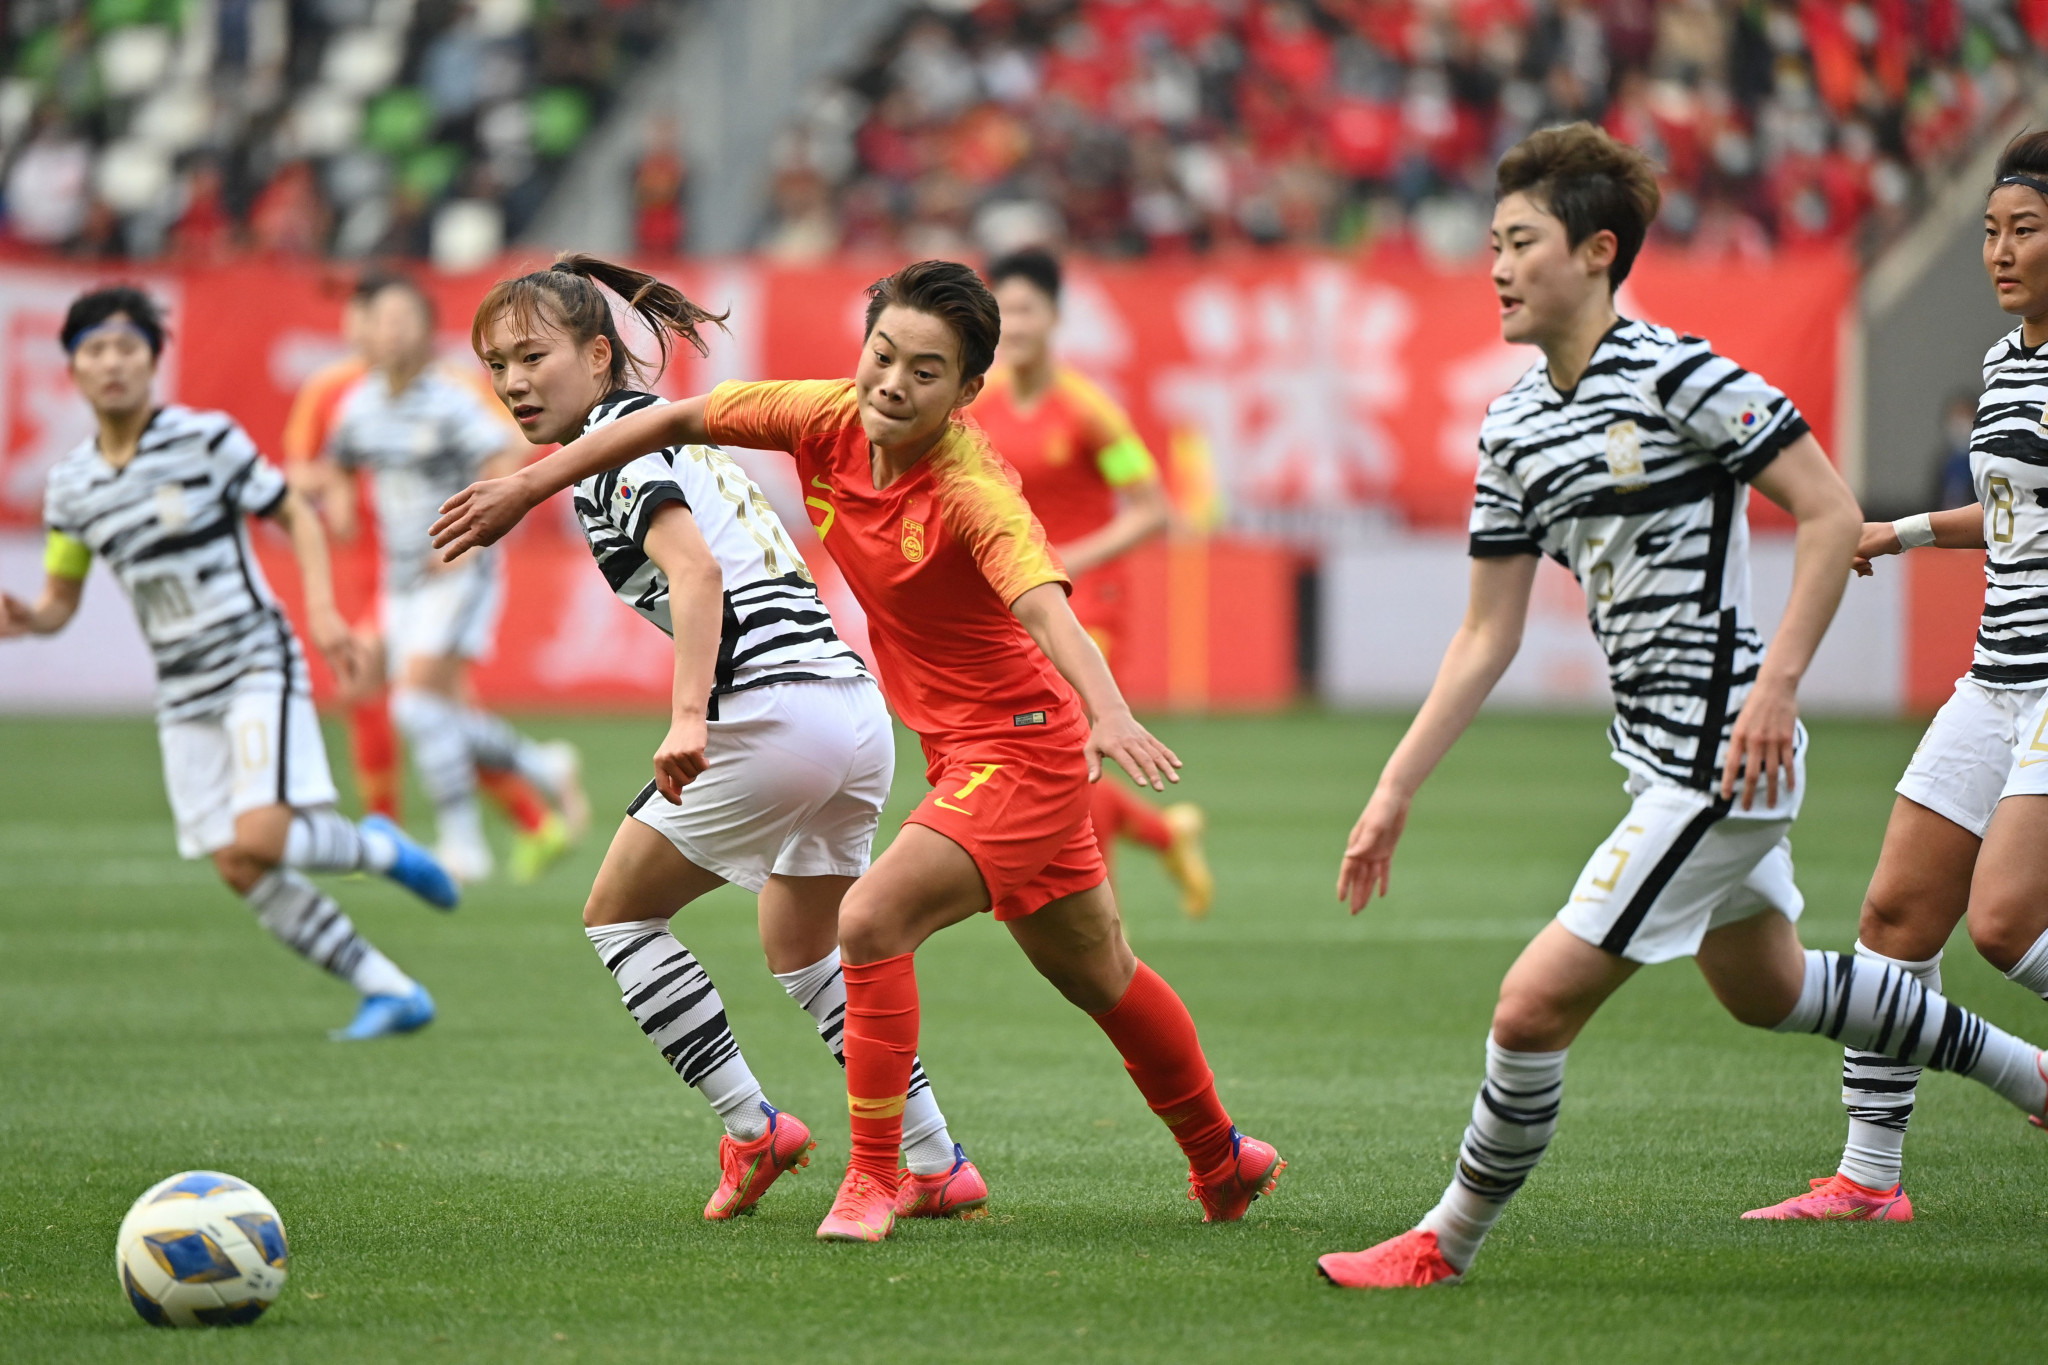 A 2-2 draw in Suzhou was enough to see China reach the Tokyo 2020 Olympics women's football tournament ©Getty Images